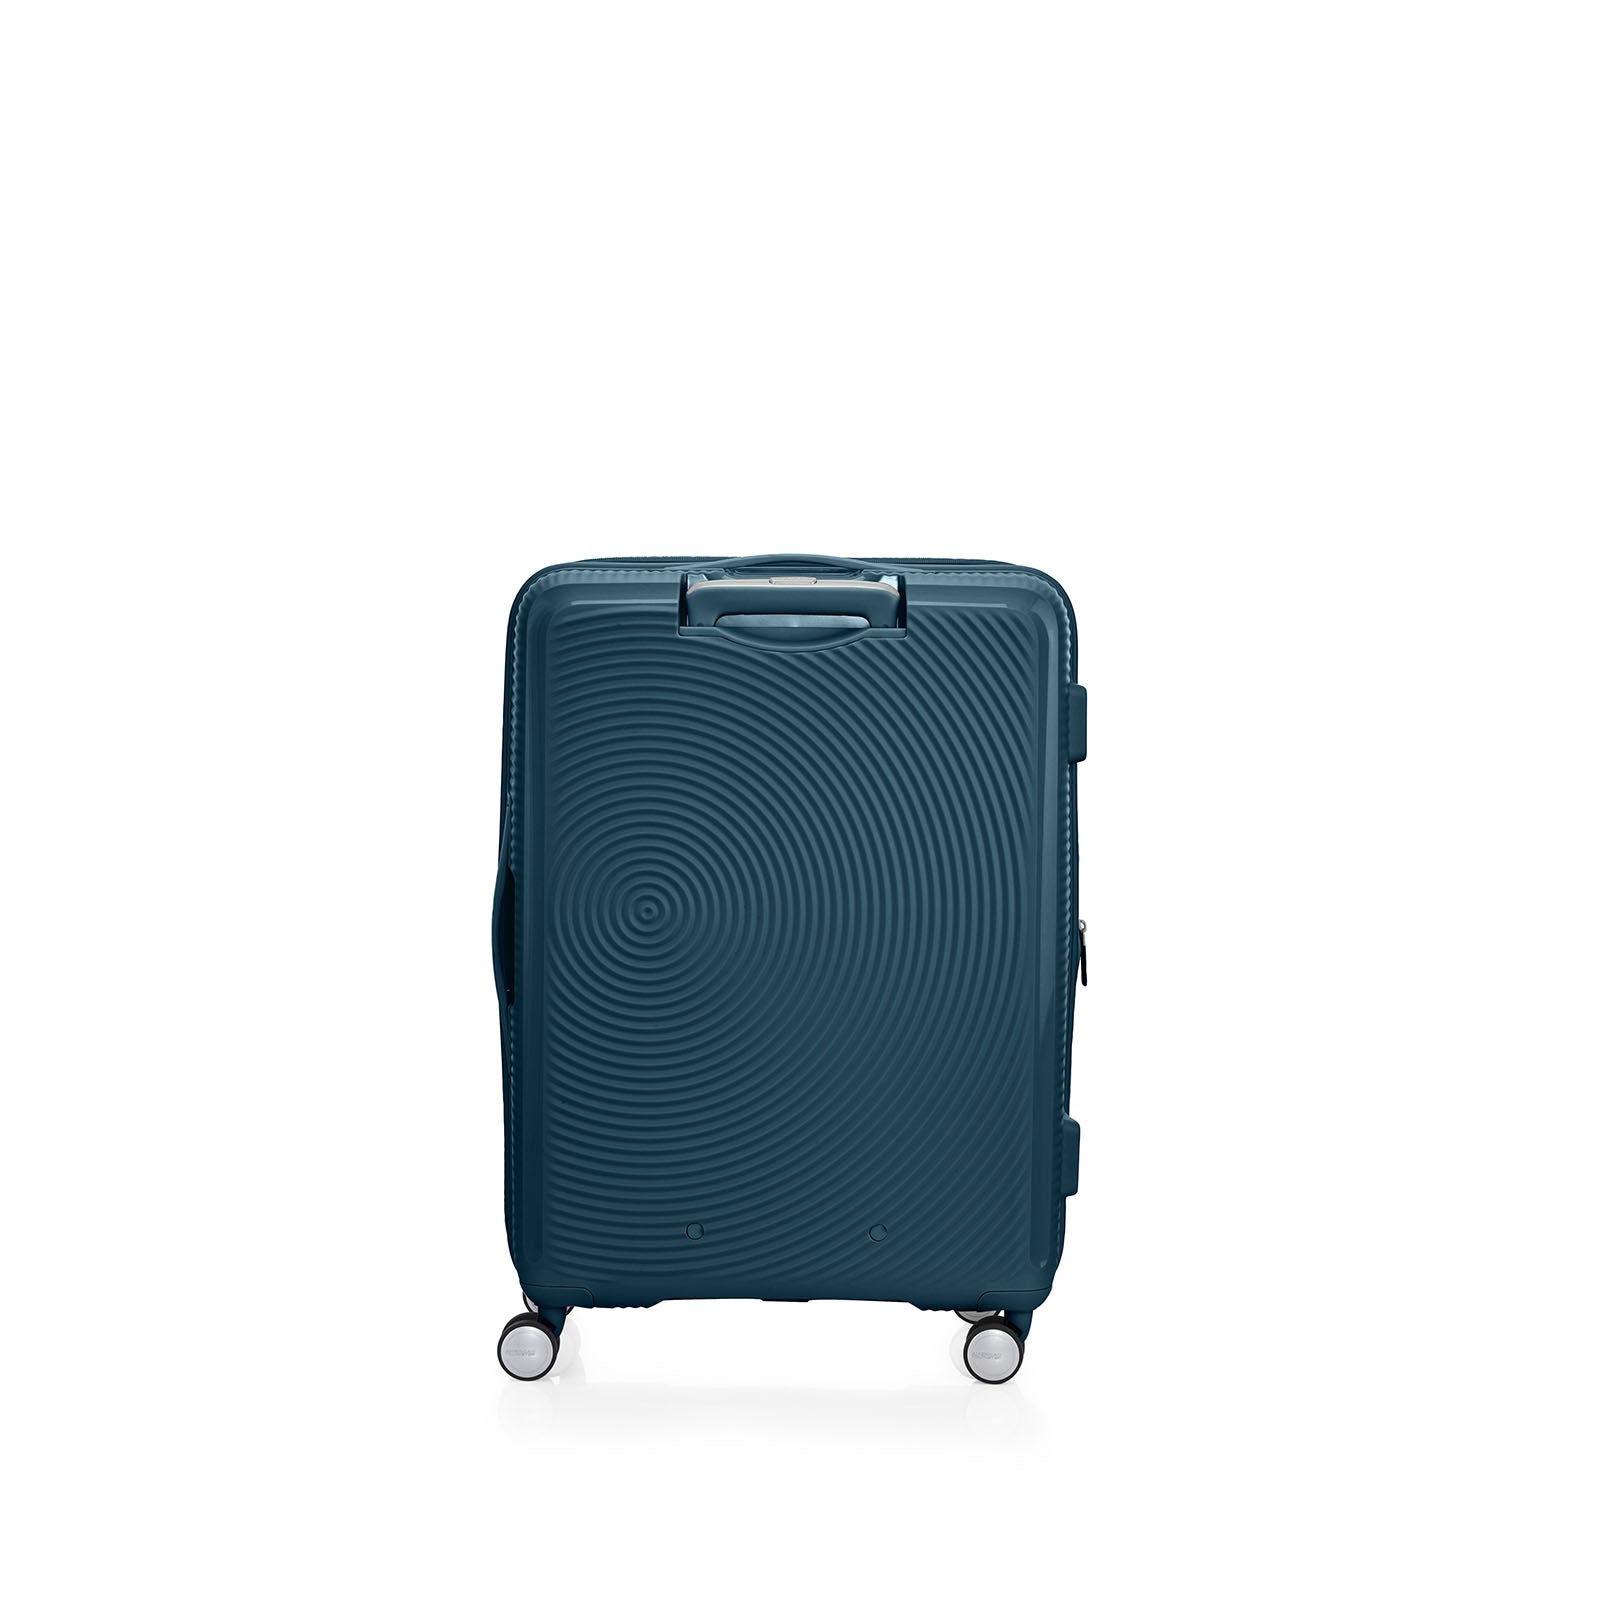 American-Tourister-Curio-2-69cm-Suitcase-Varisty-Green-Back